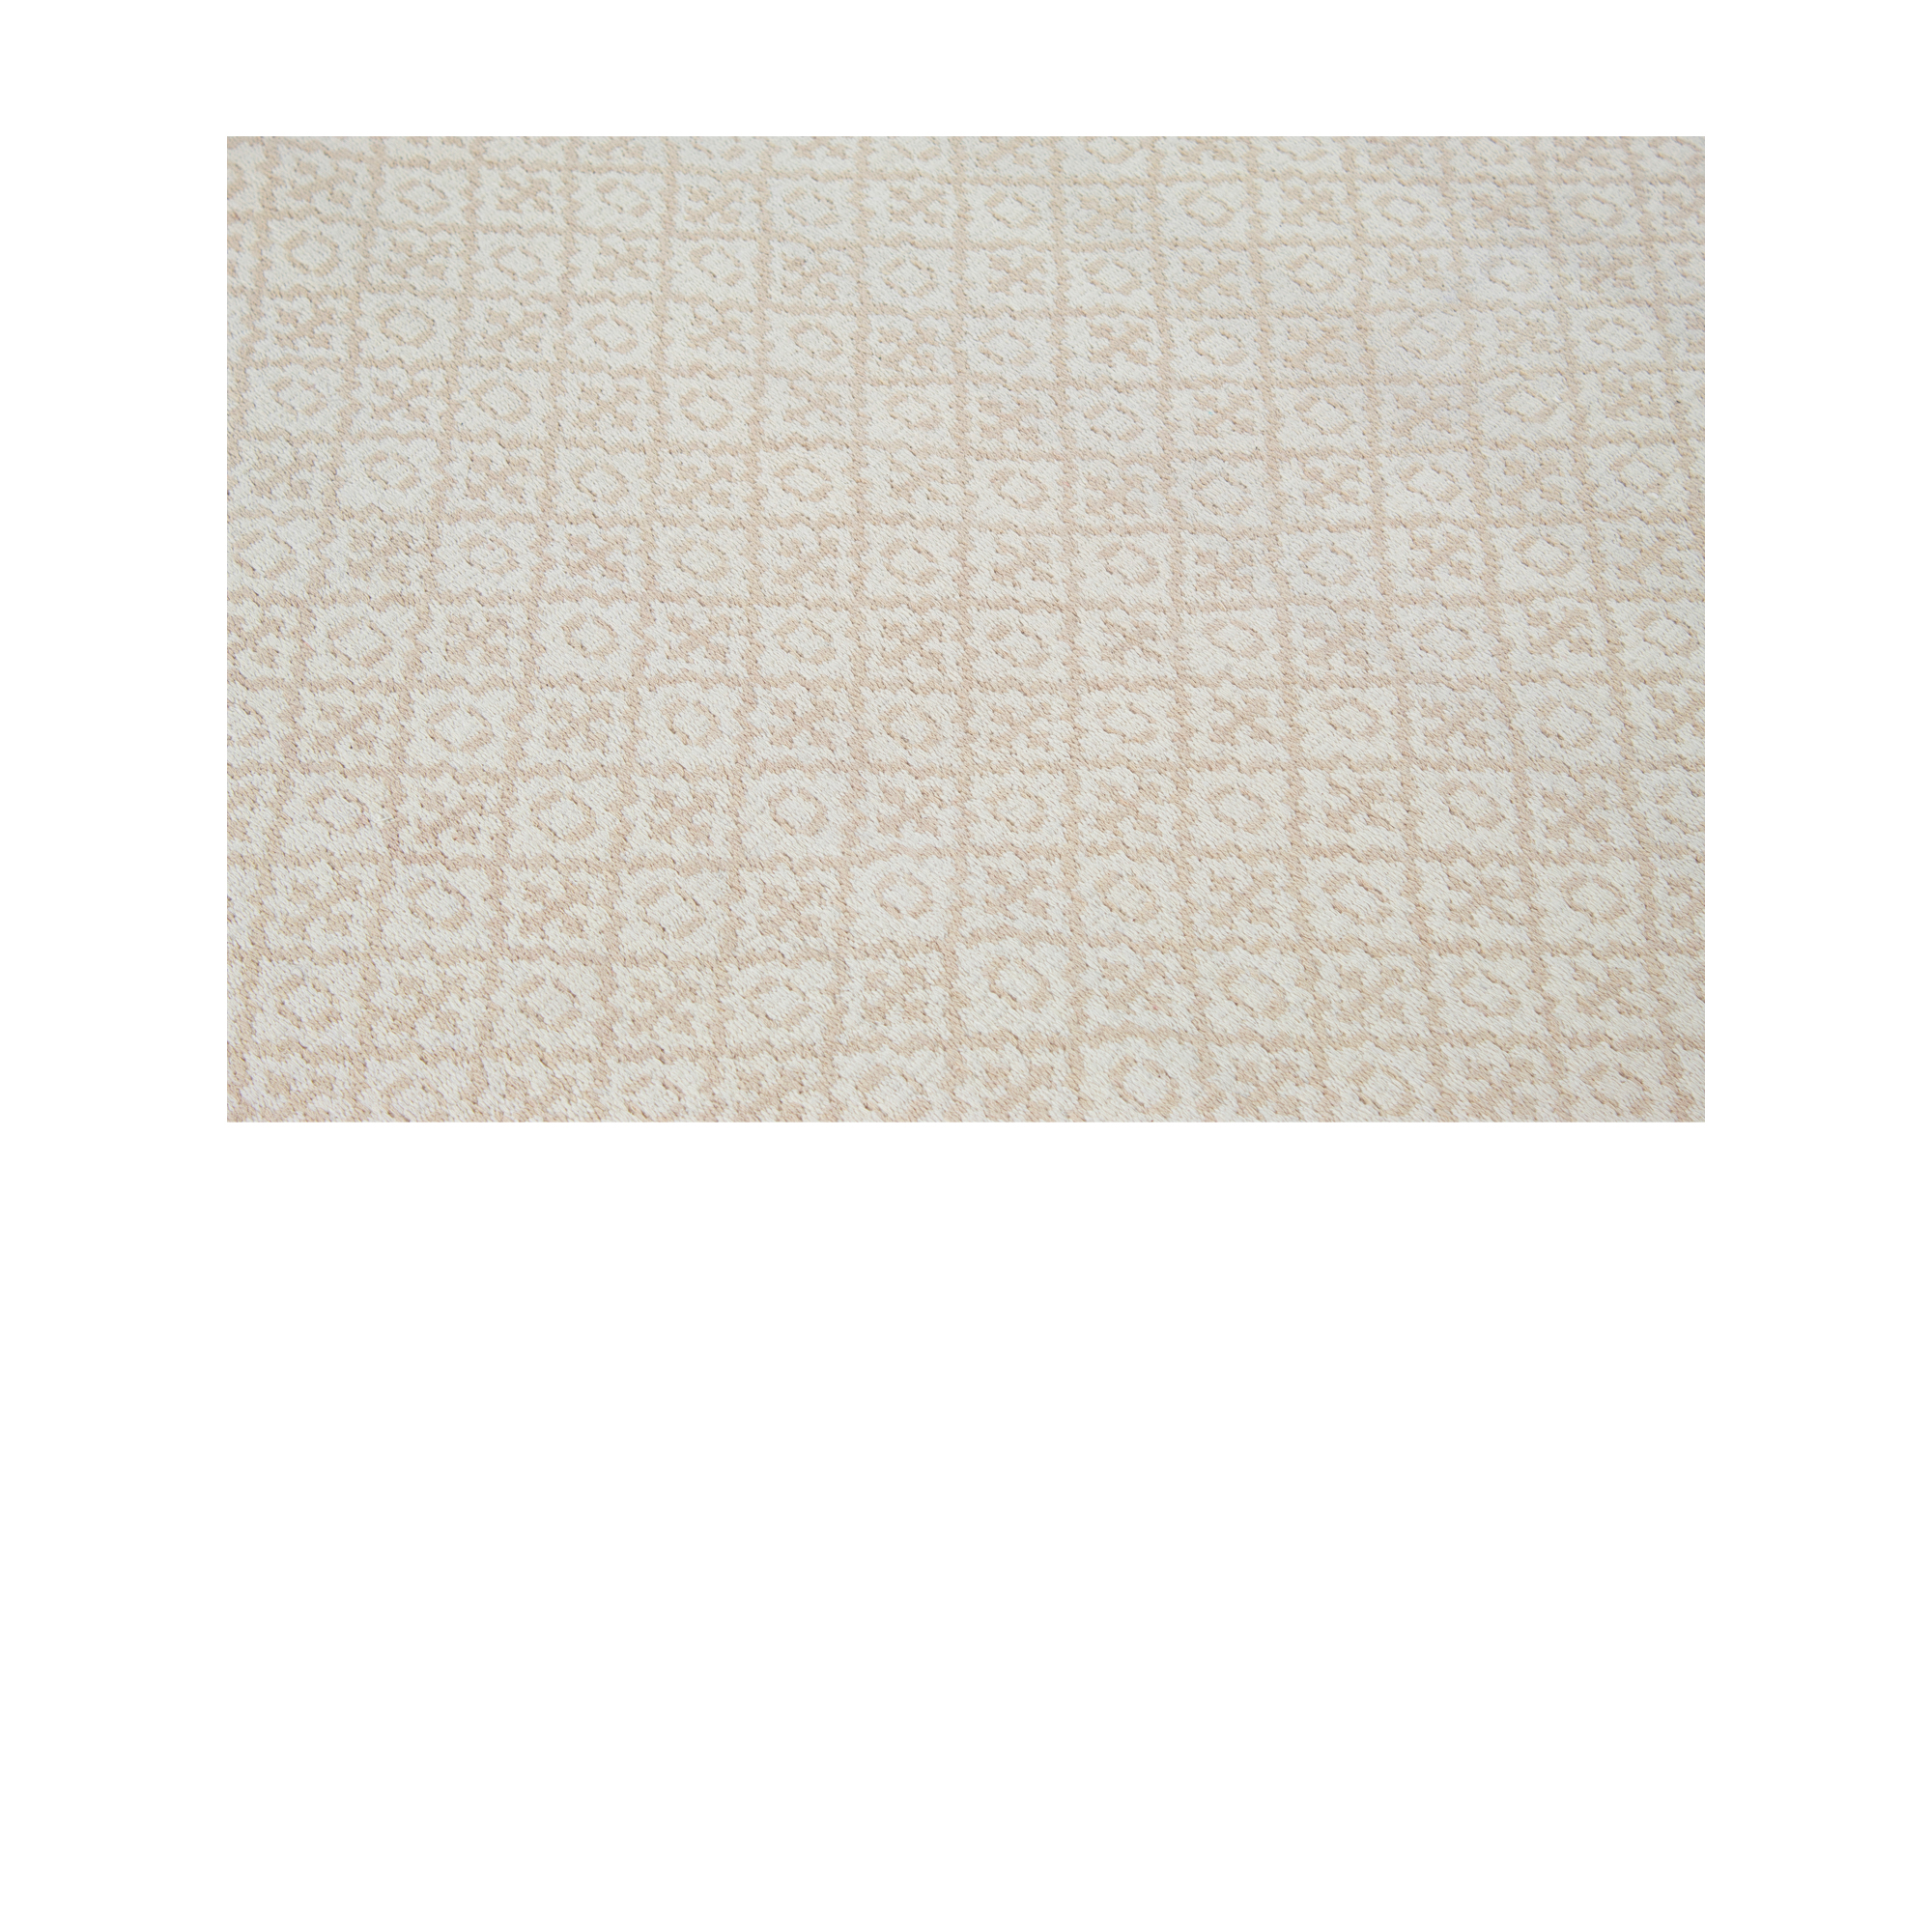 Zeillu rug is a modern flatweave piece comprised of 100% cotton and natural dyes. 